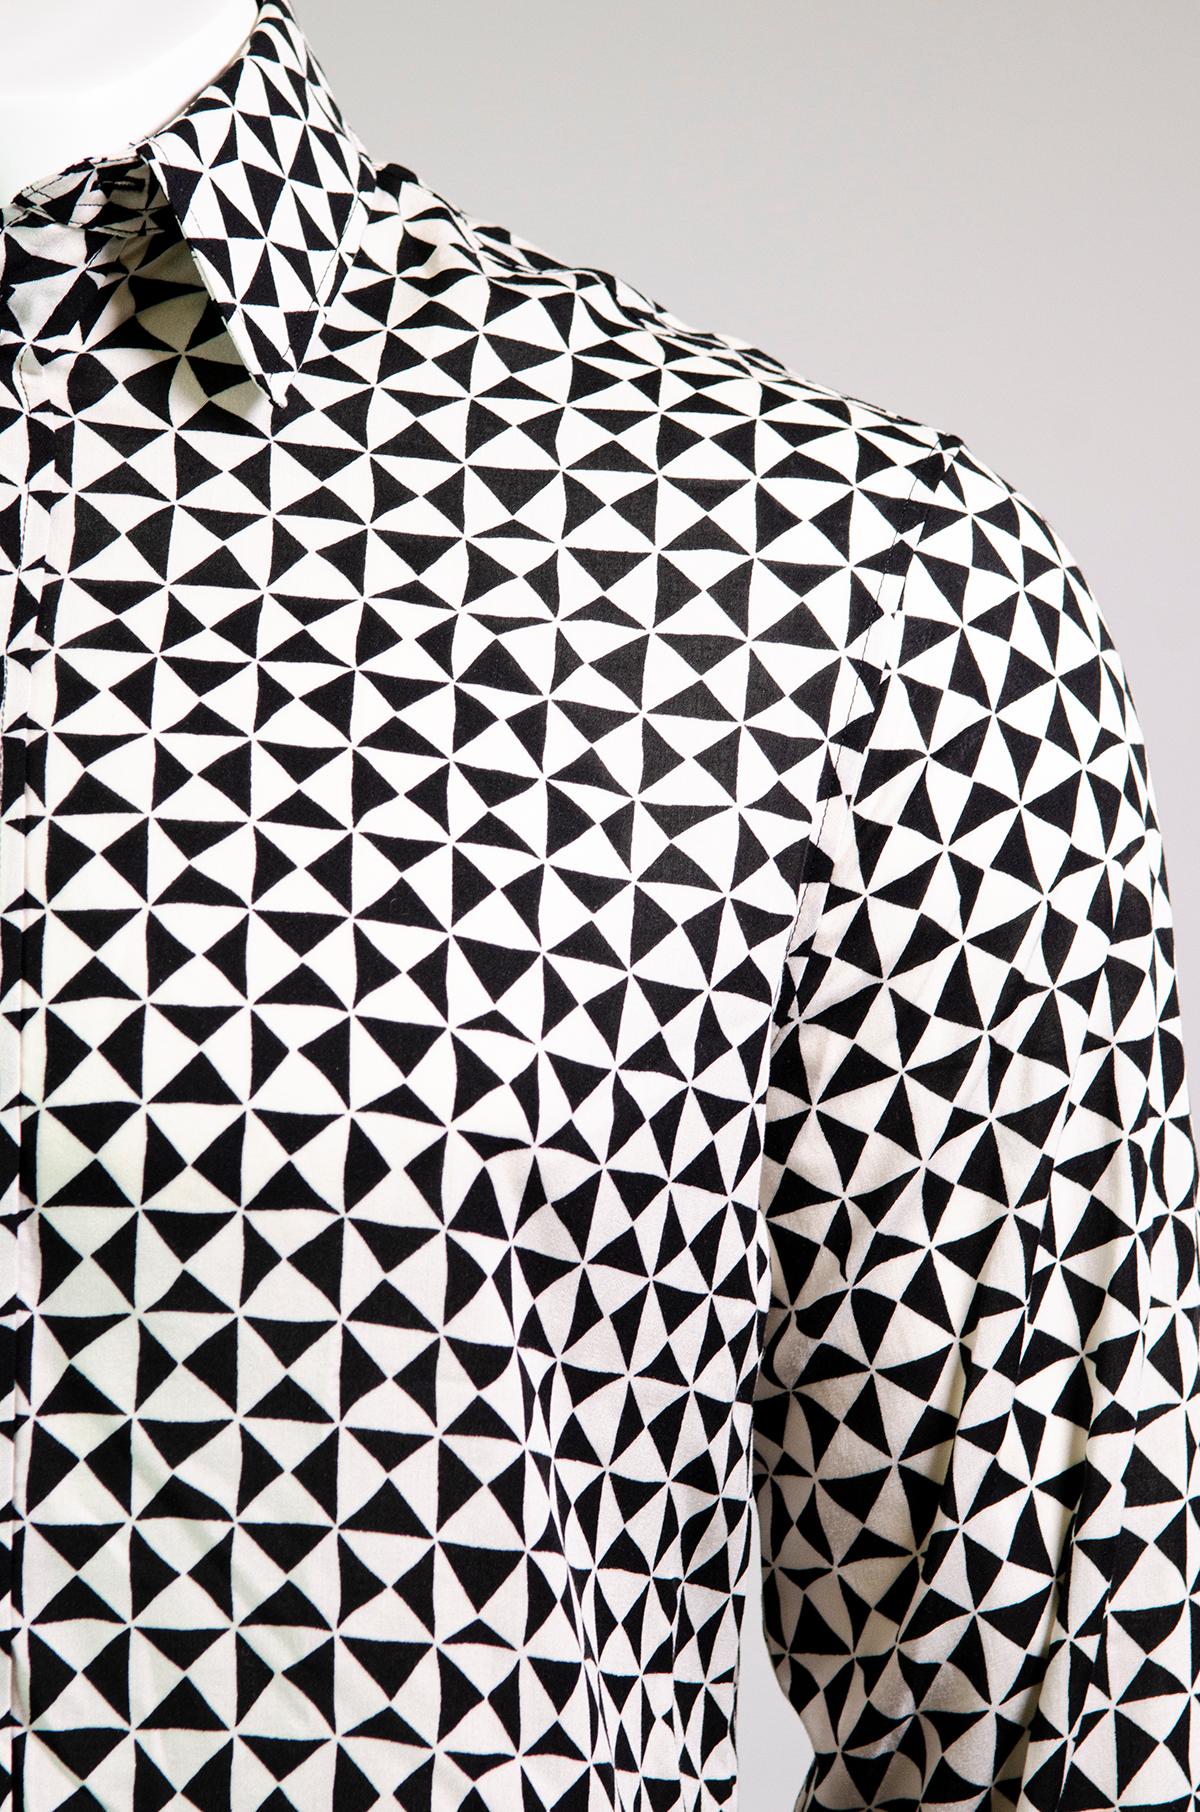 CELINE BY HEDI SLIMANE 70's Inspired Monochrome Shirt In Excellent Condition For Sale In Berlin, BE